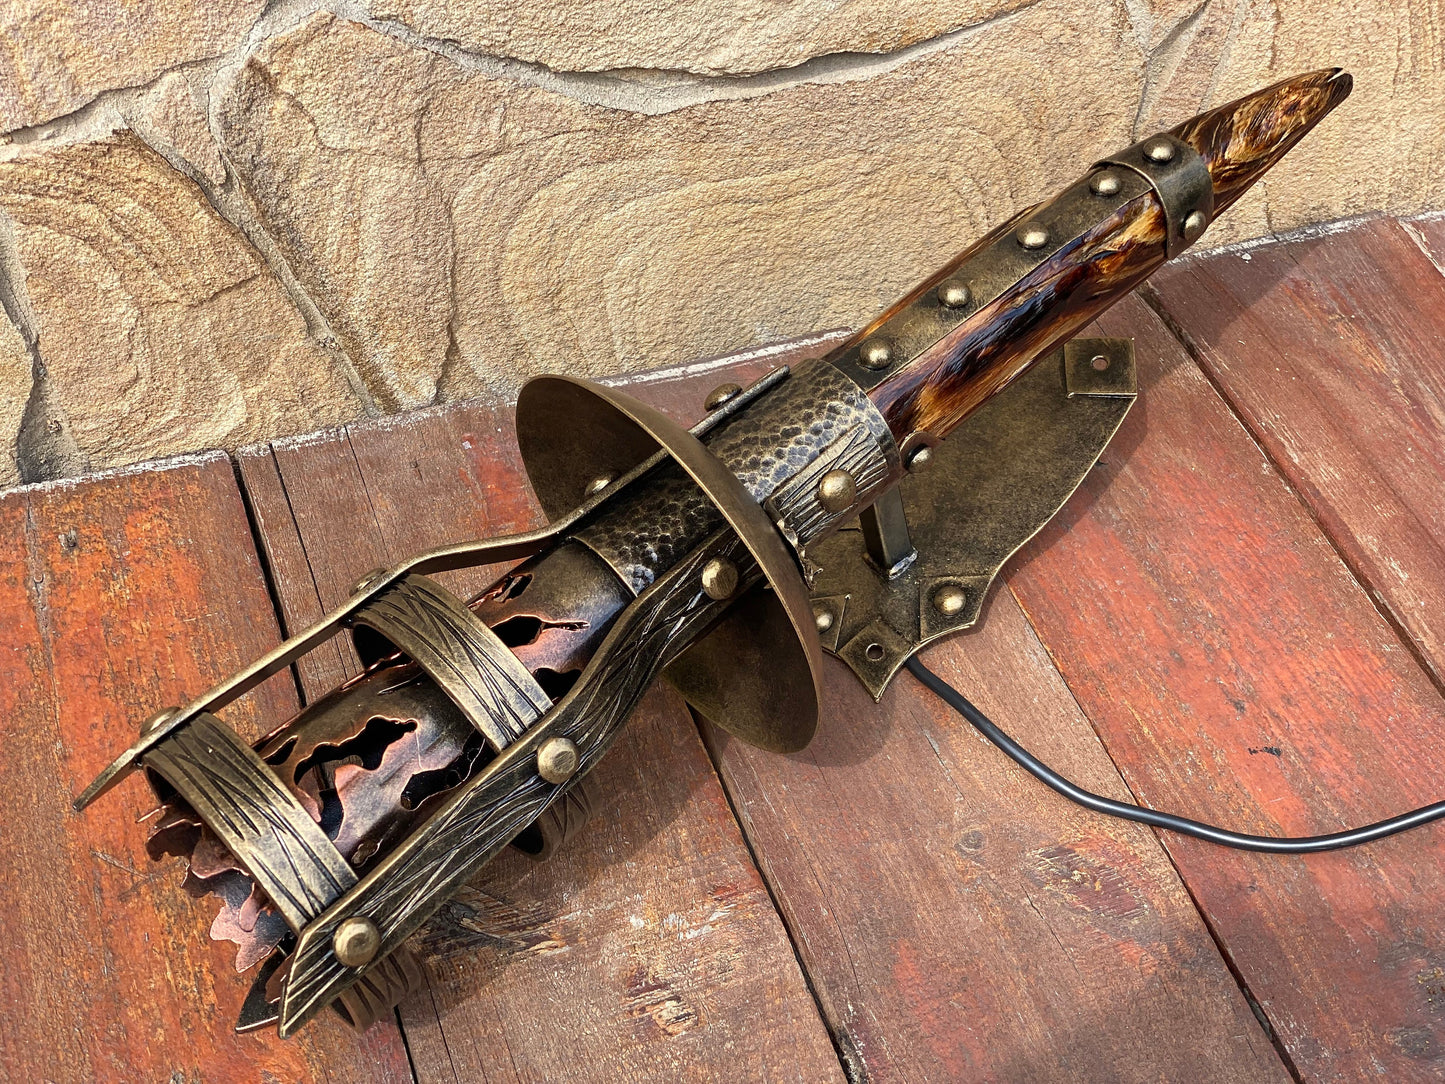 Wall sconce, viking, medieval lantern, man cave, torch, castle, medieval light, Middle Ages, Christmas, birthday, anniversary,antique,knight